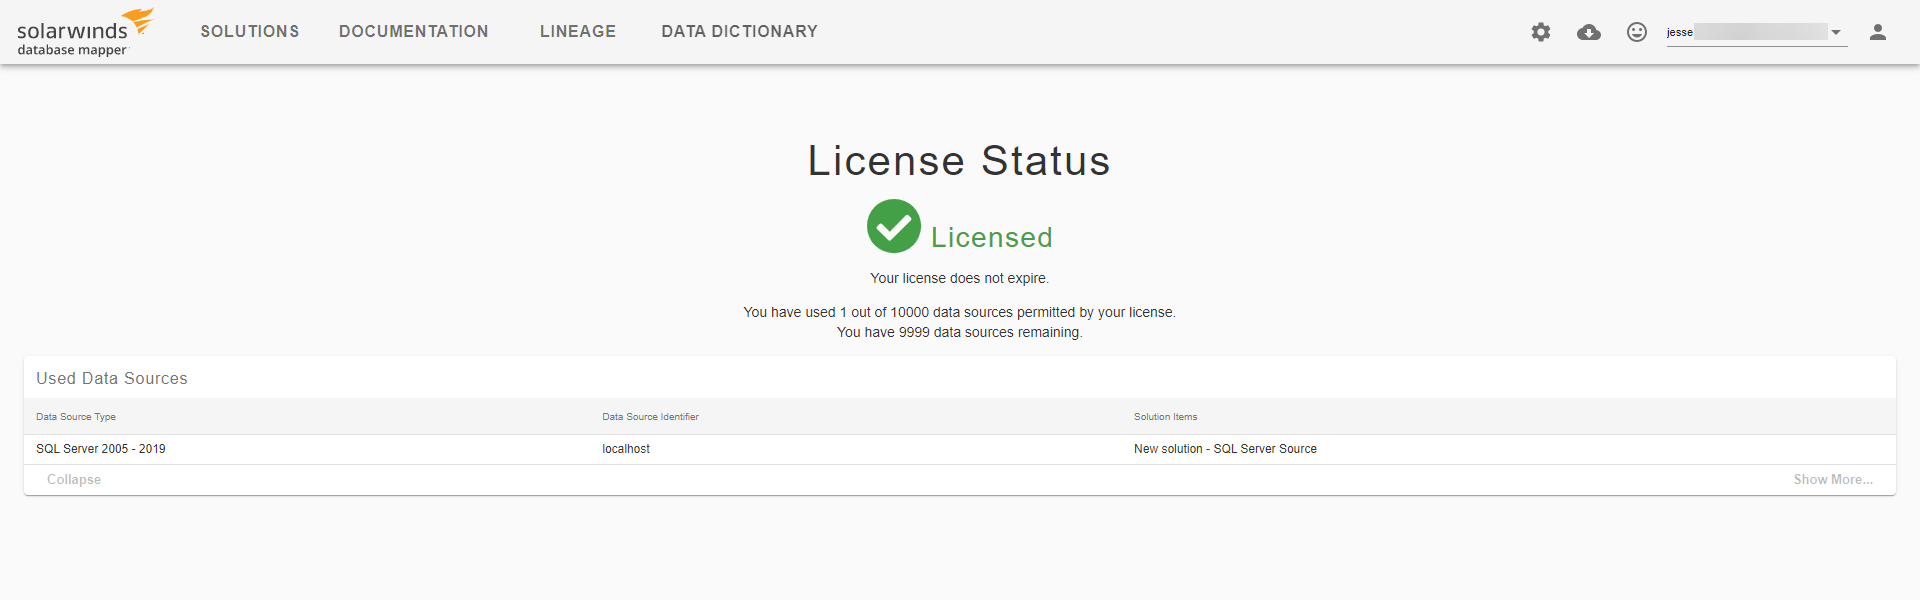 Database Mapper License Status page